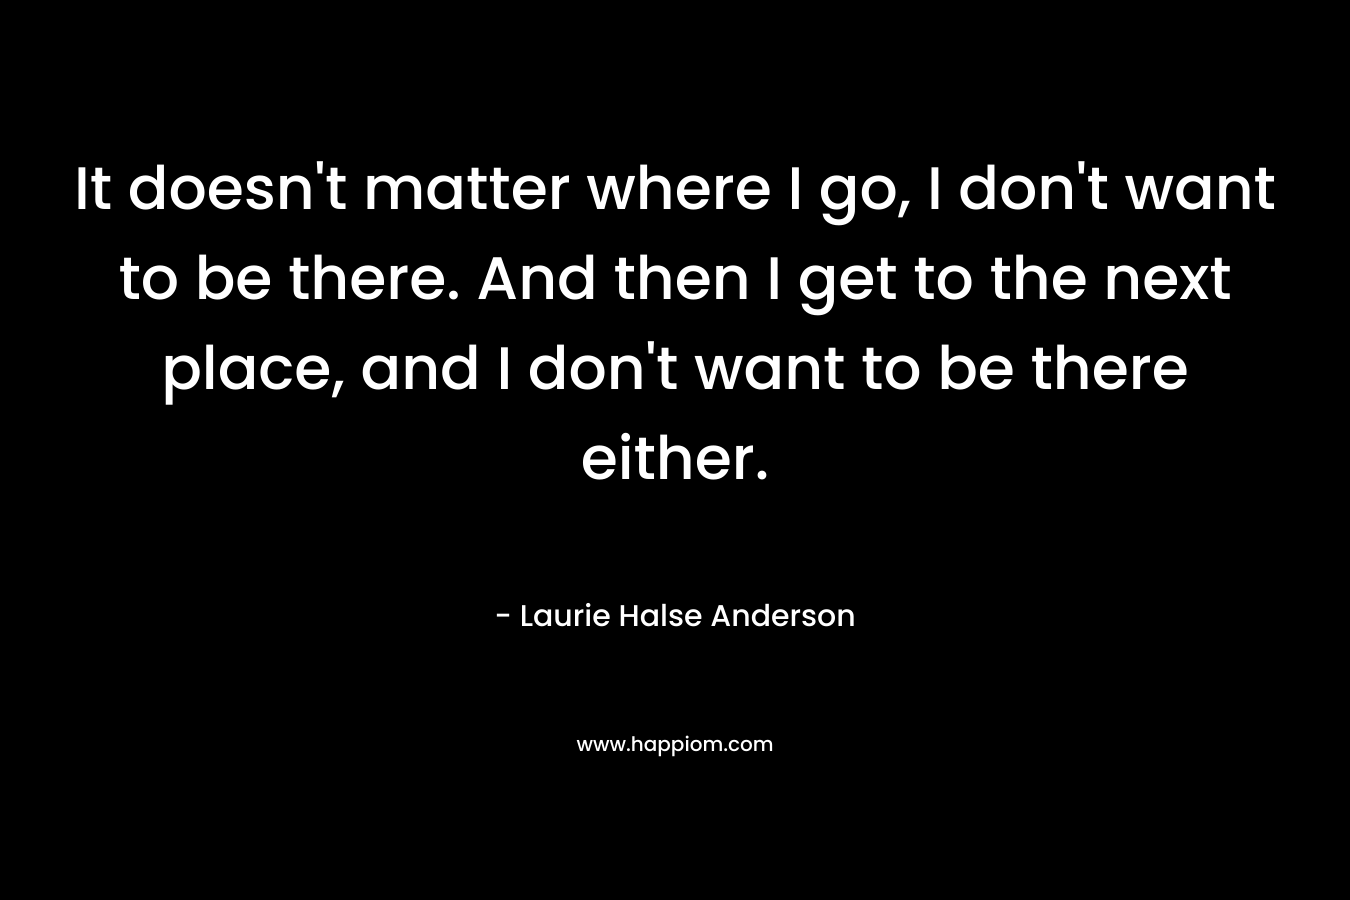 It doesn’t matter where I go, I don’t want to be there. And then I get to the next place, and I don’t want to be there either. – Laurie Halse Anderson